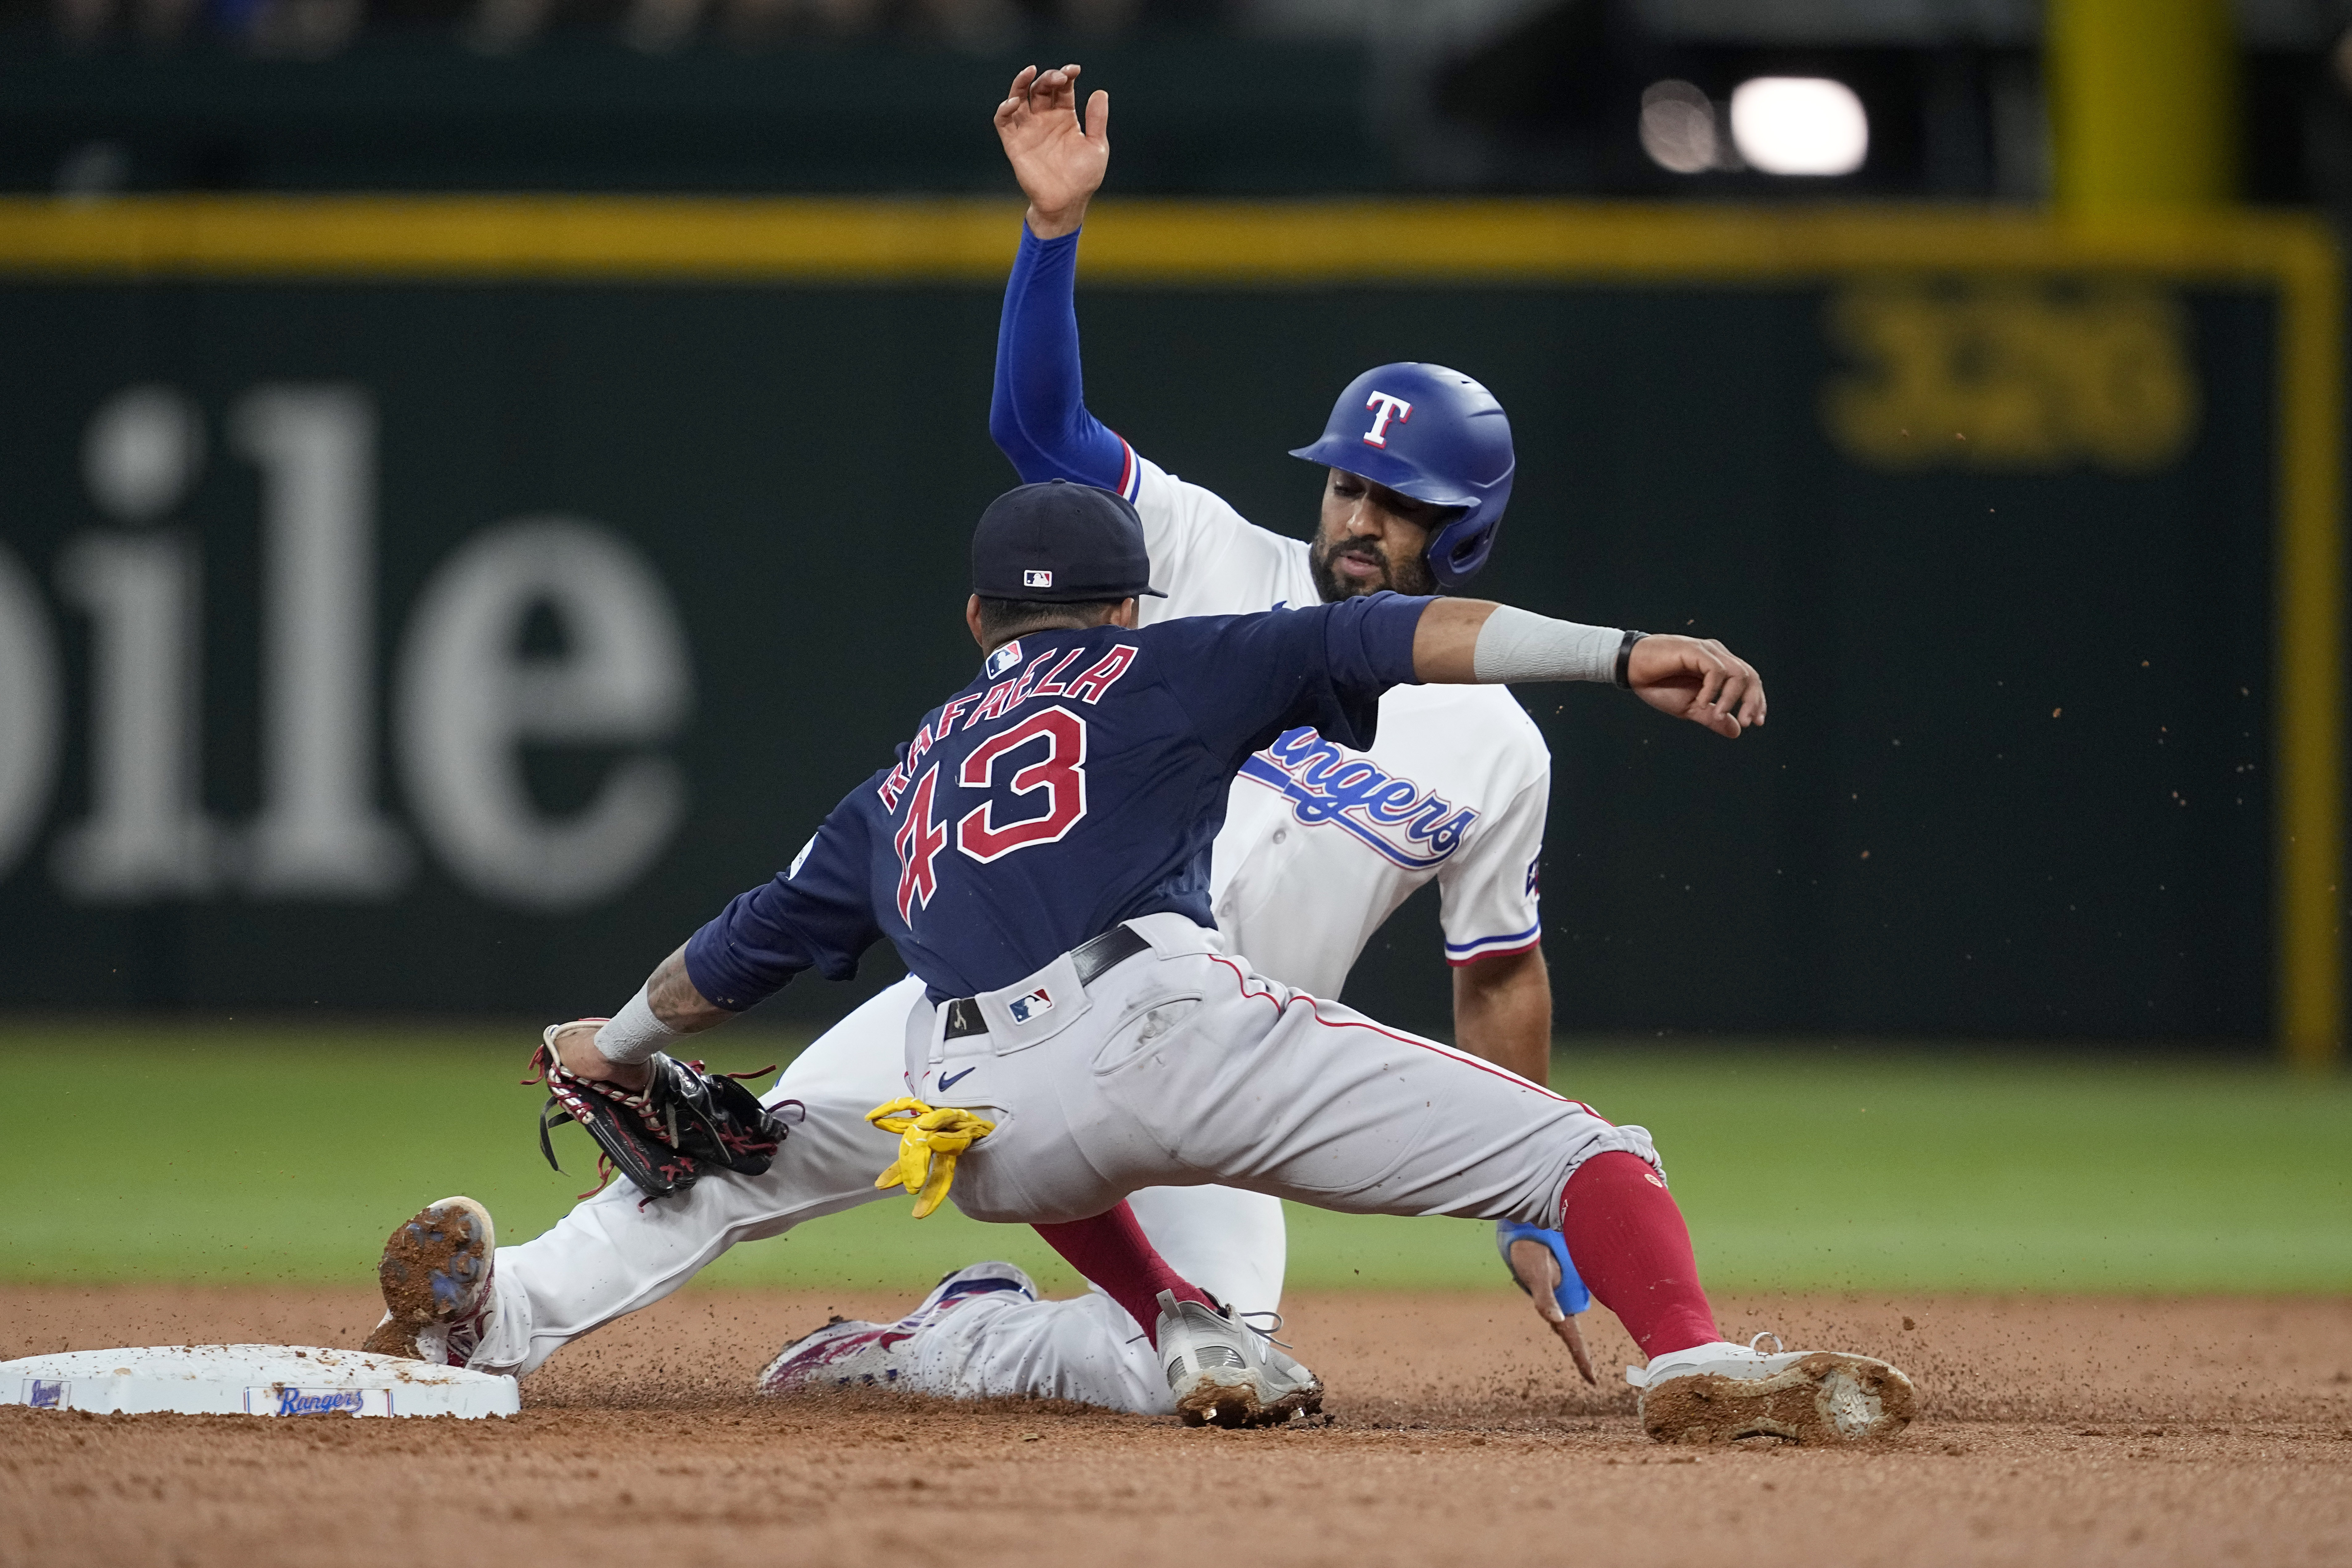 Playoff-chasing Rangers hit 4 homers in a 15-5 win over Red Sox